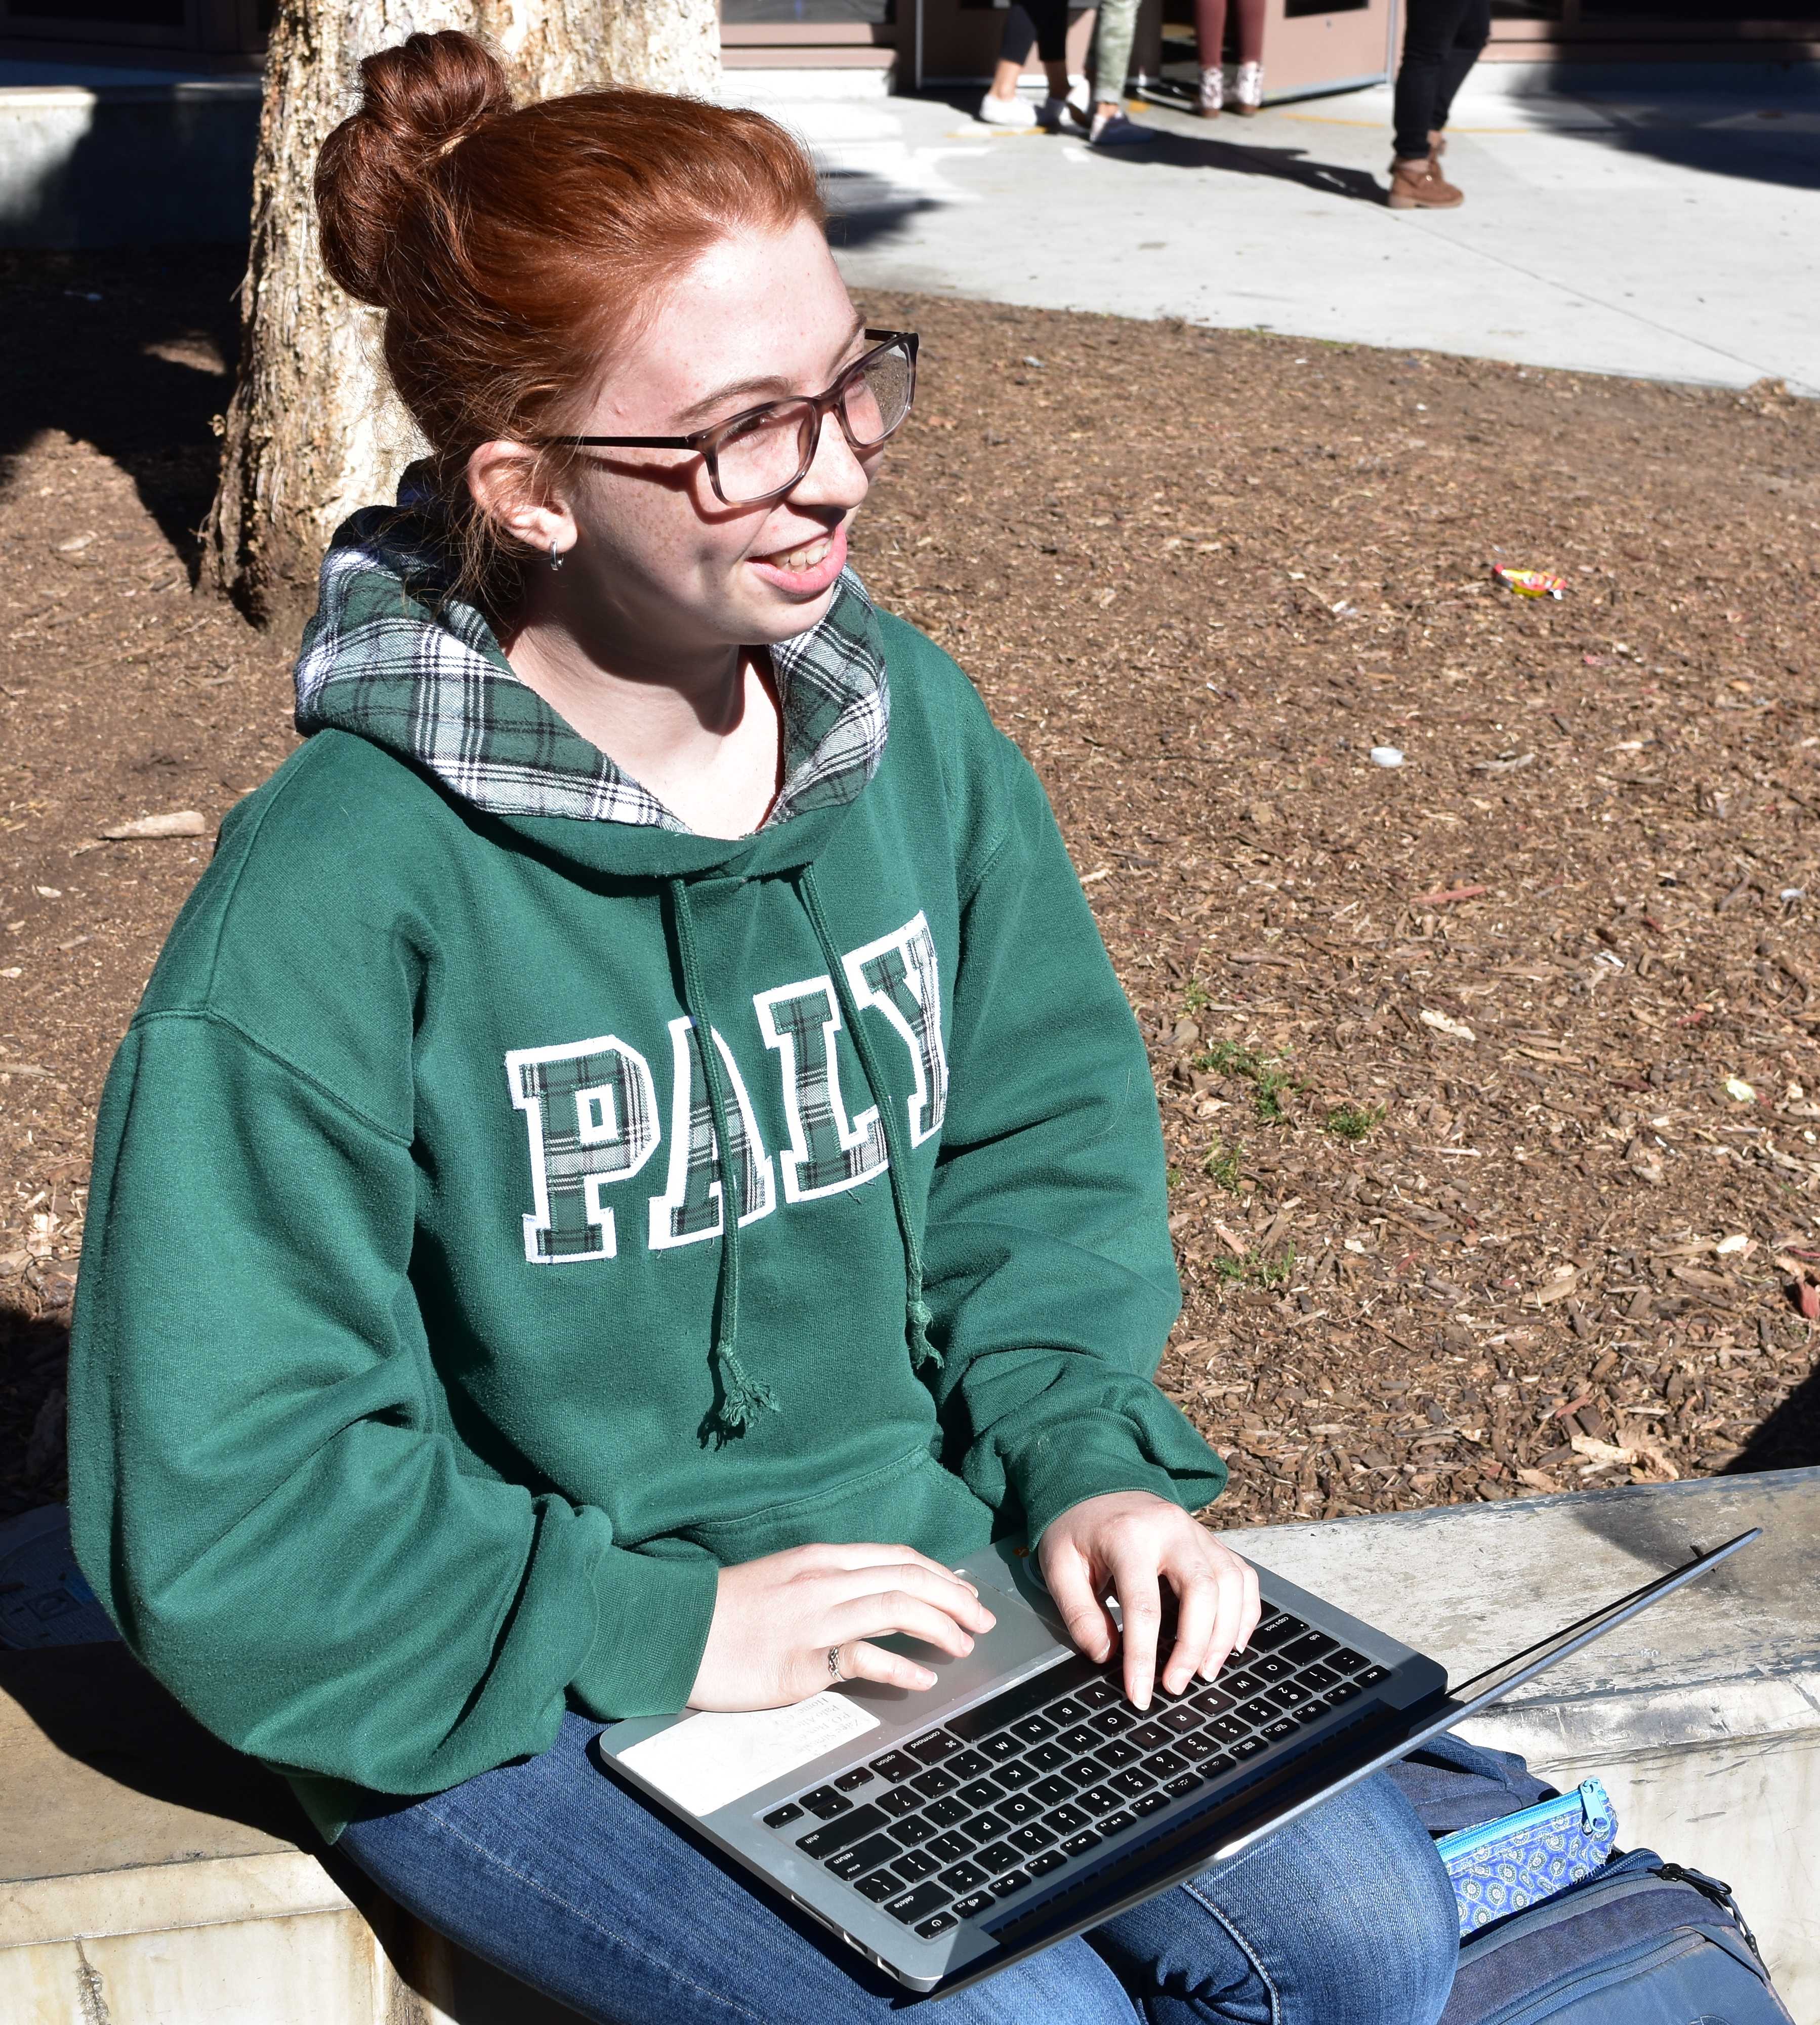 Junior Zage Phillips works on a coding assignment for her Advanced Placement Computer Science class. Phillips expressed support for the idea of a mandatory CS requirement, but added that students should be able to choose from a variety of programming-related classes. "I think it would be a great idea for students to have a one semester requirement of some sort of programming class[[.]] ... However, I do understand that programming isn't everyone's strong suit, so I think it would also be nice to create more programming and software engineering classes at Paly so there is something for everyone." Photo: Nisha McNealis